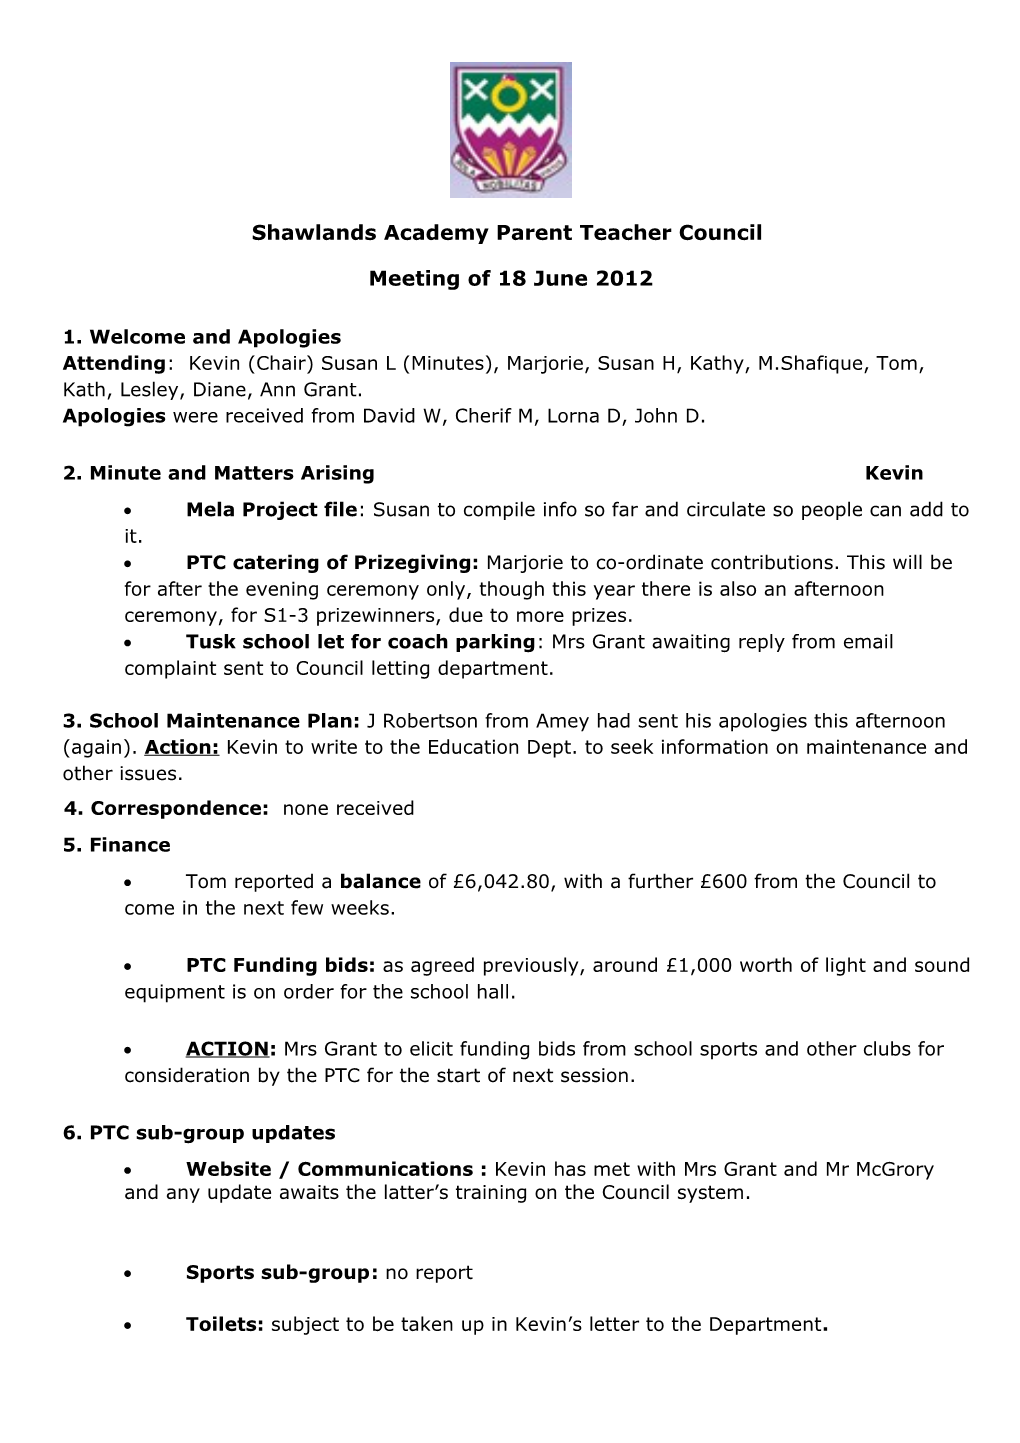 Minutes of Shawlands Academy PTC Meeting